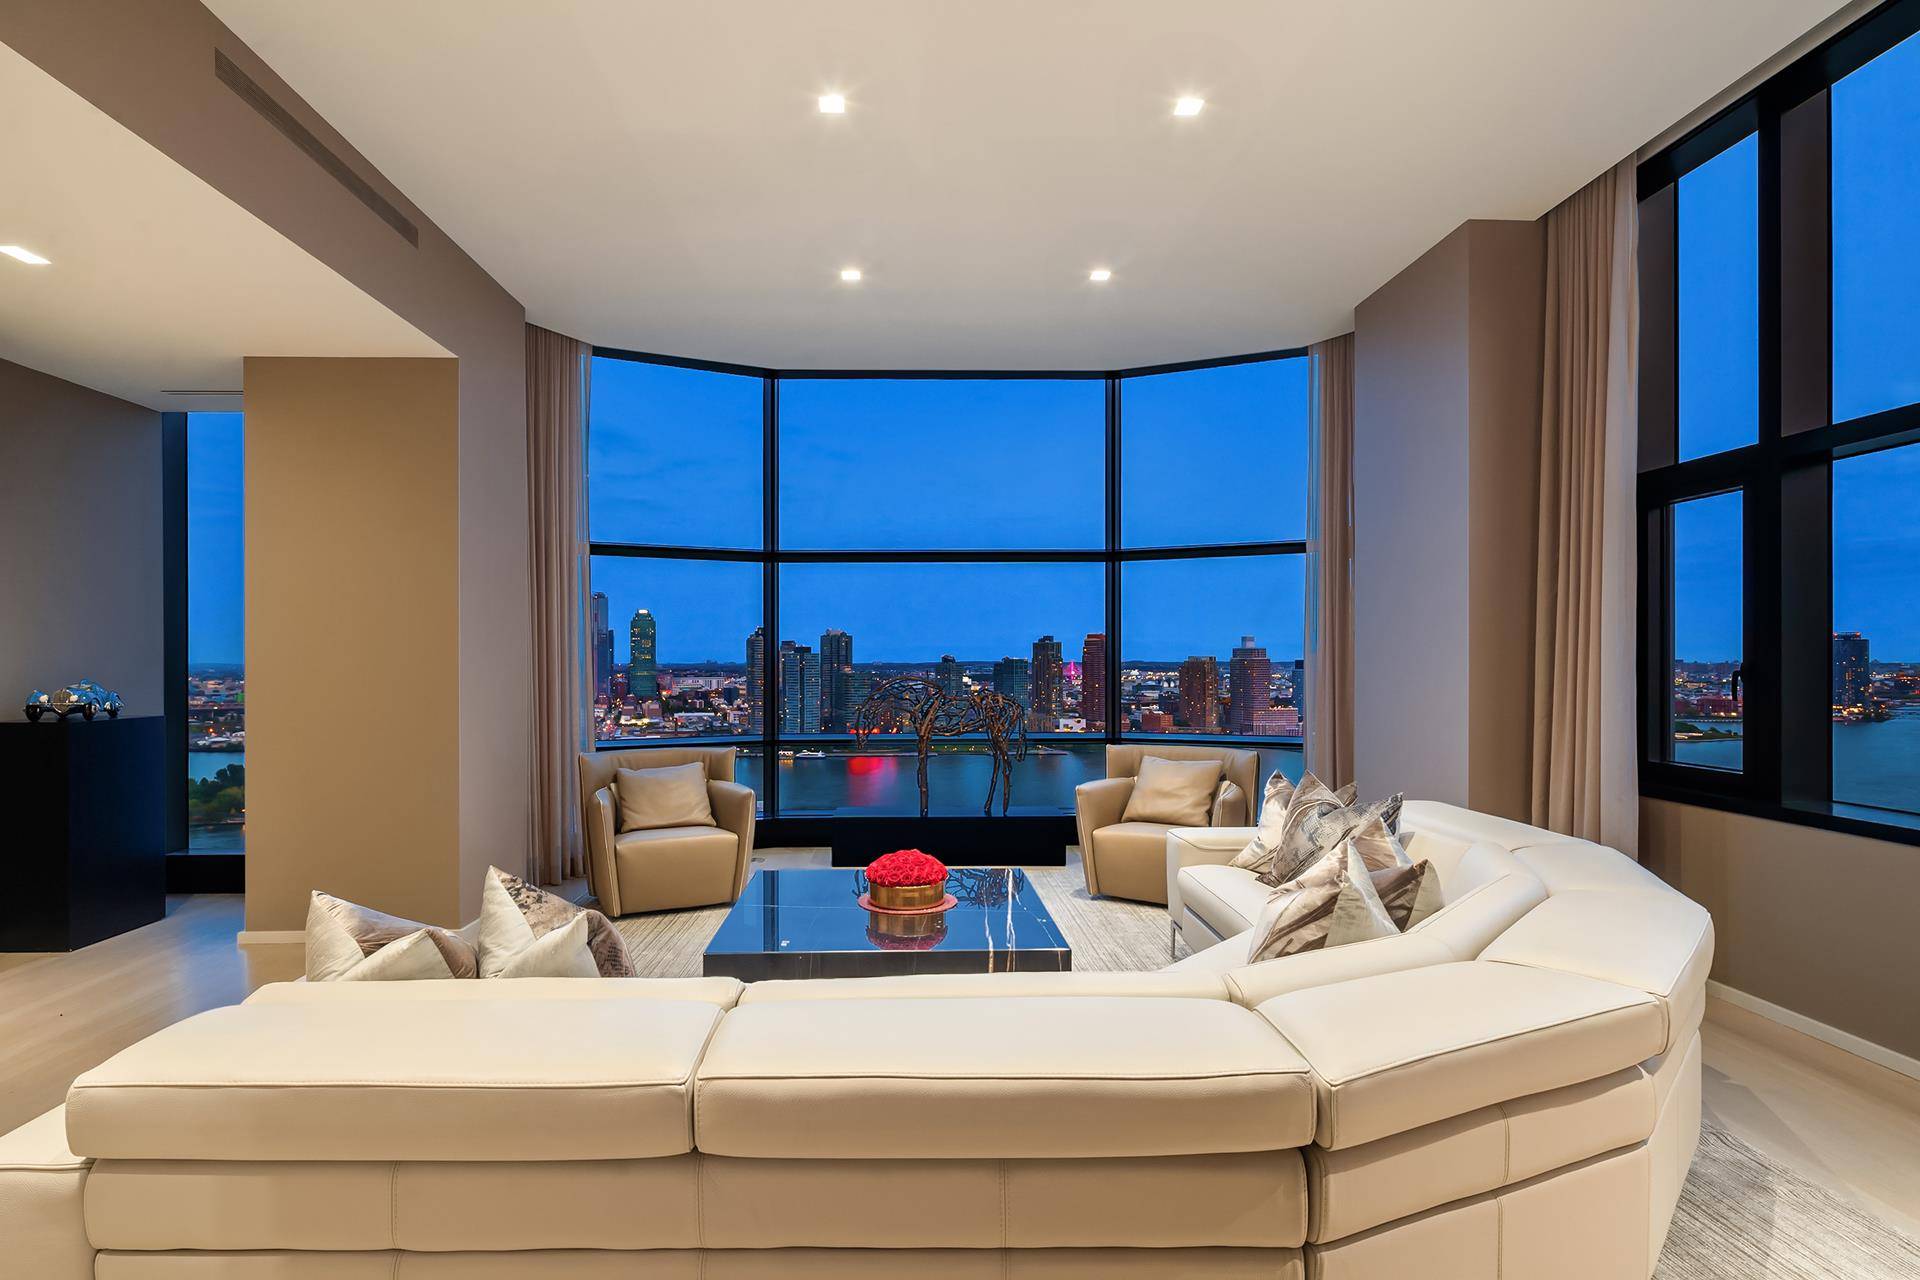 Sophisticated and sun drenched, this corner three bedroom, three bathroom luxury condominium residence designed by architect Sir Norman Foster, provides panoramic sweeping views of the East River, The United Nations, ...